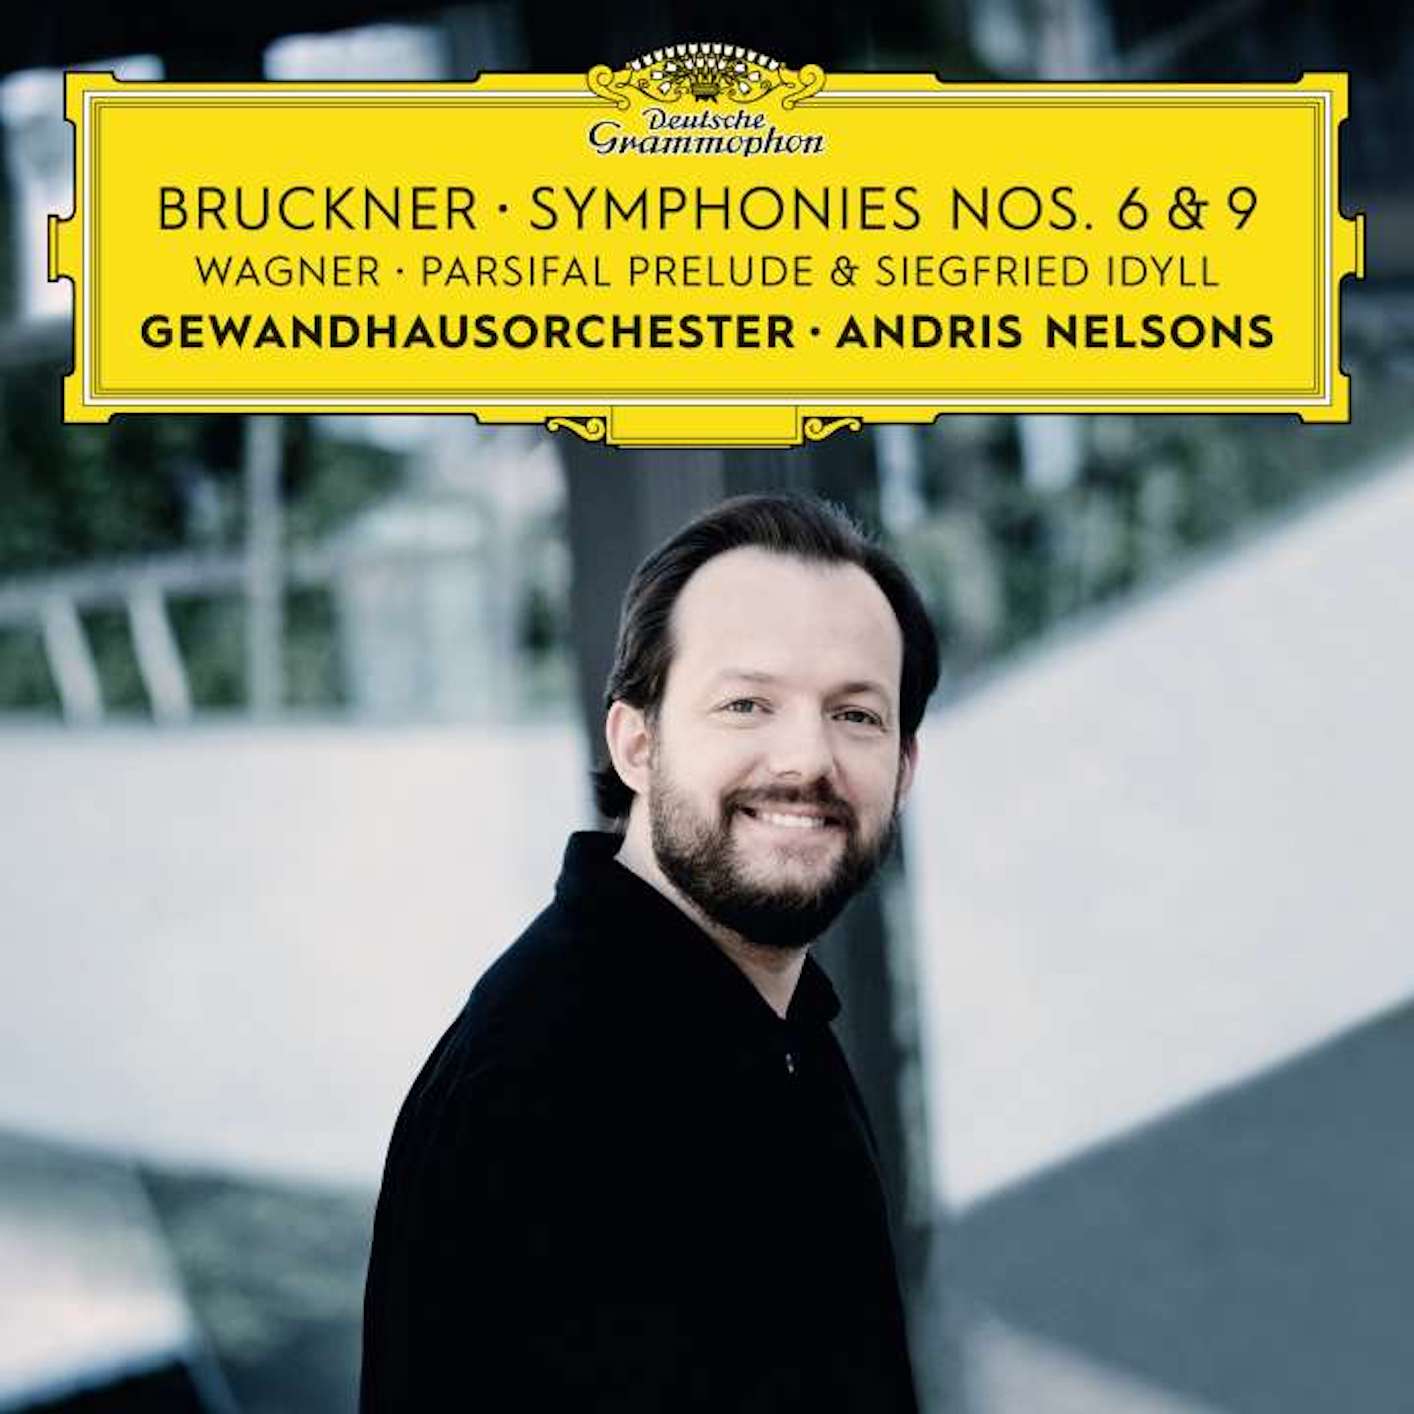 Andris Nelsons - Bruckner: Symphonies Nos. 6 & 9 - Wagner: Siegfried Idyll / Parsifal Prelude (2019) [FLAC 24bit/192kHz]